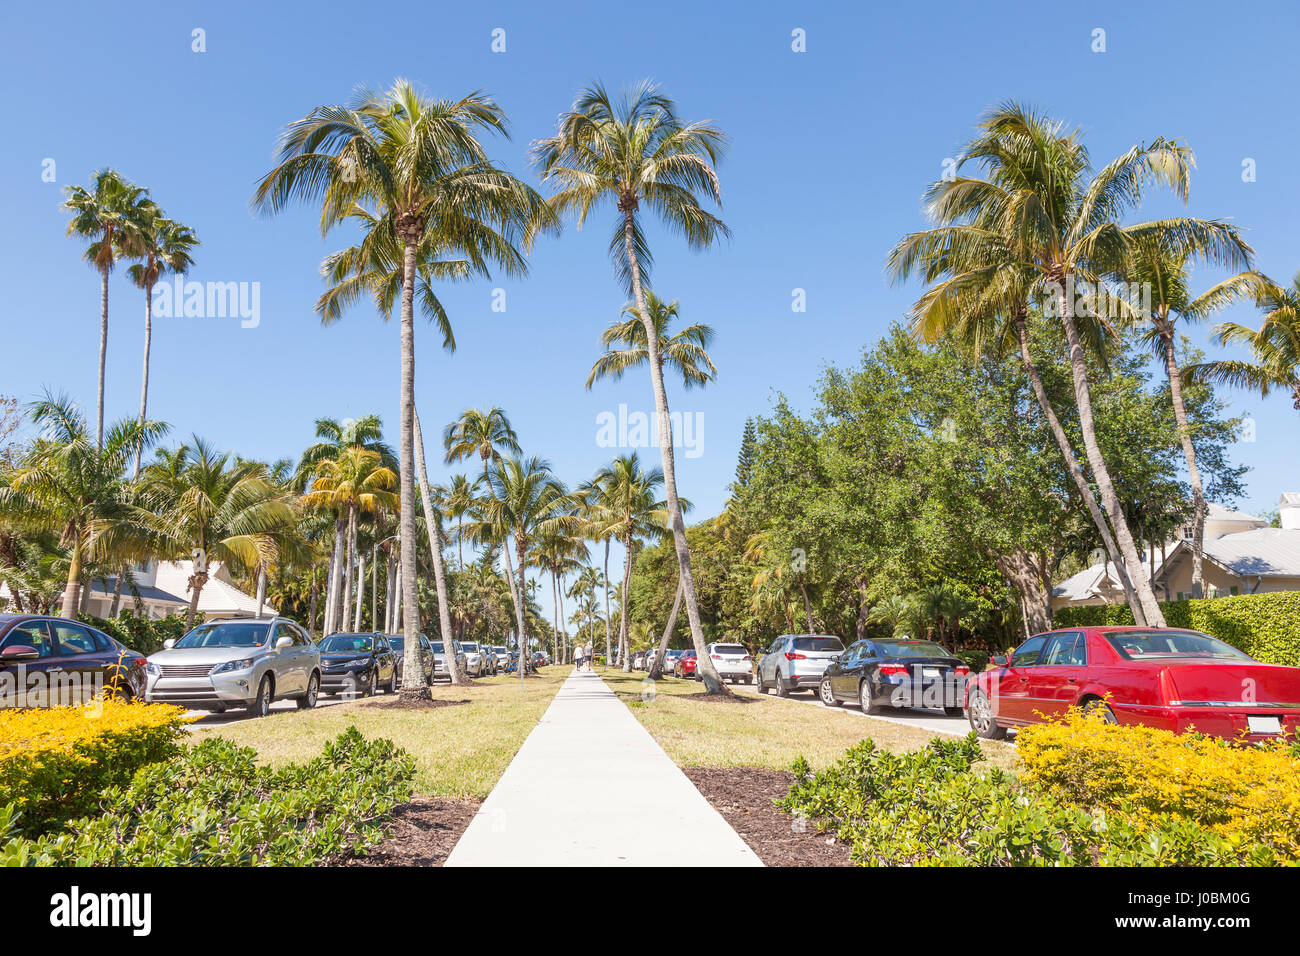 Coconut palm trees in the city of Naples. Florida, United States Stock Photo